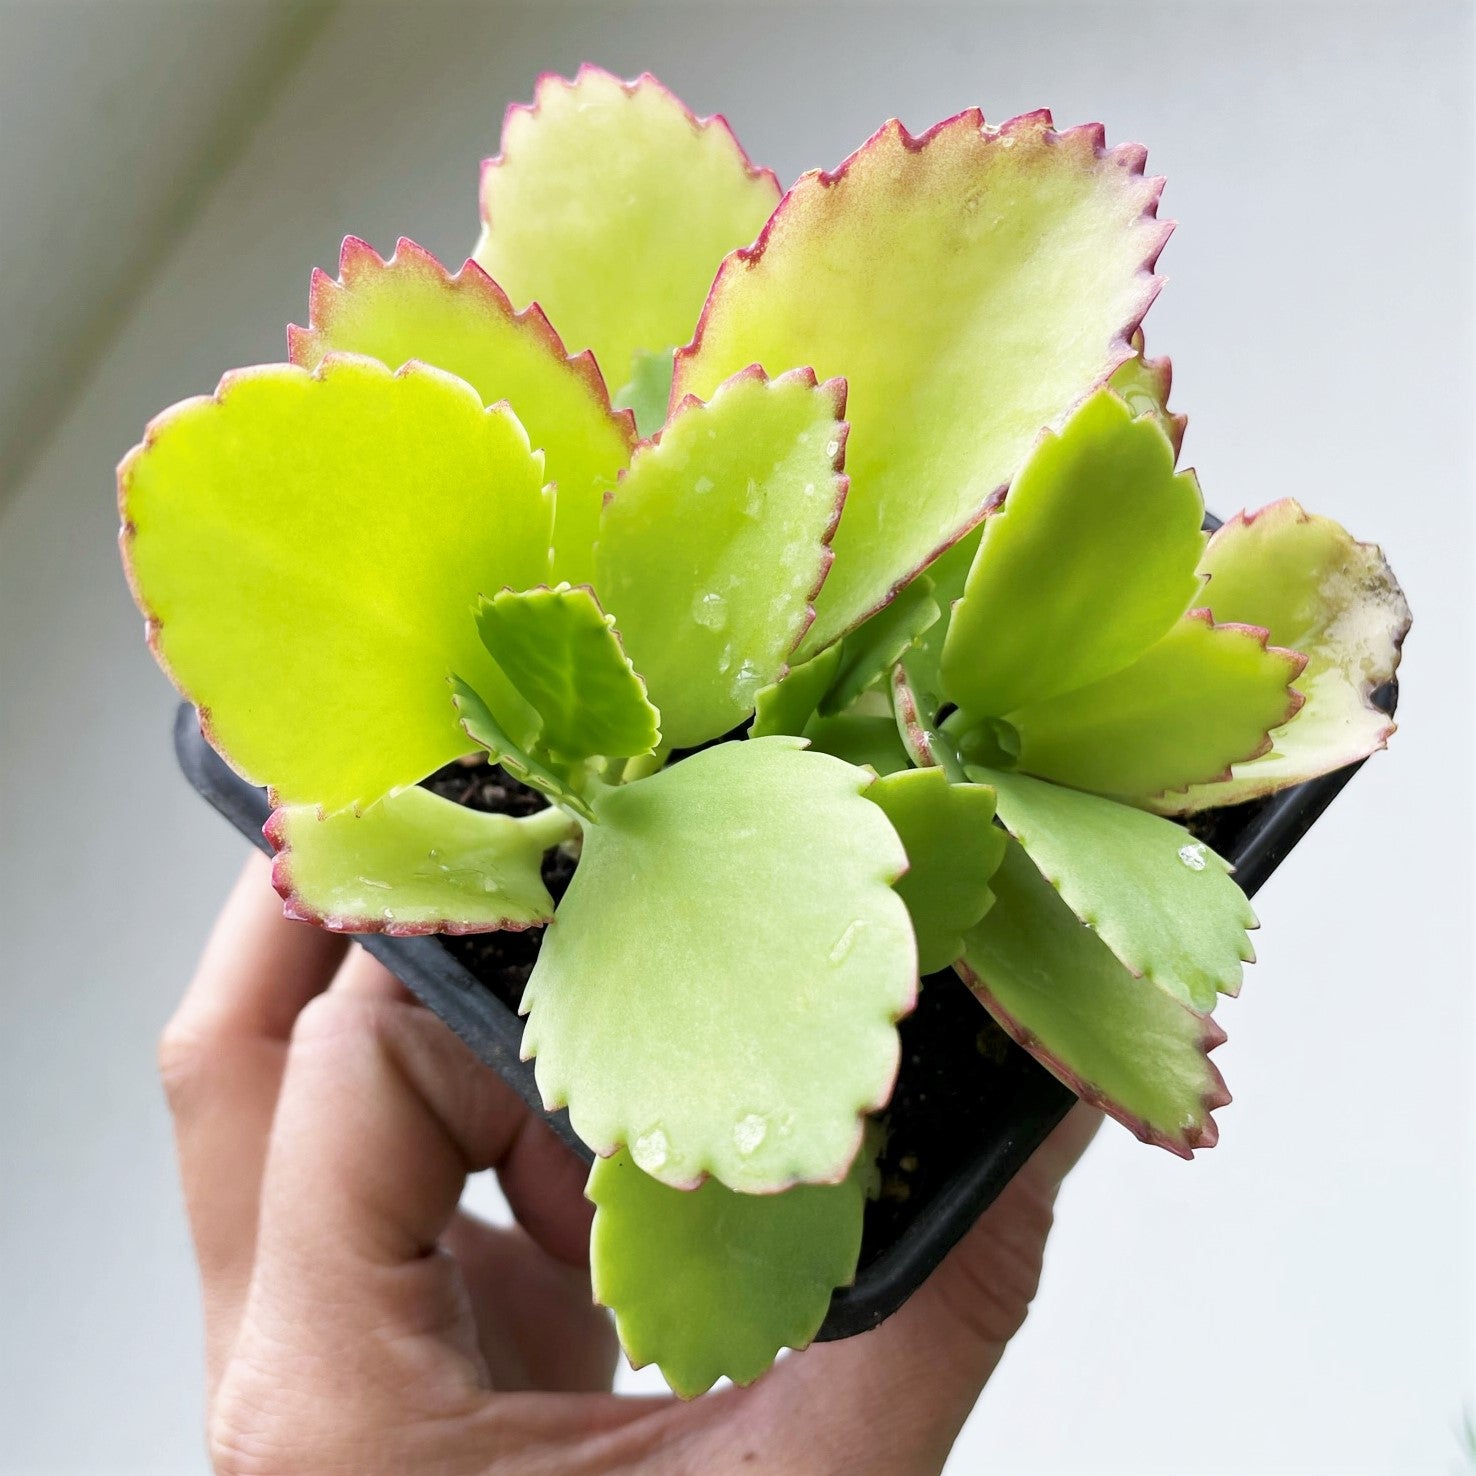 Kalanchoe daigremontiana - Mexican Hat Plant, Mother of Thousands